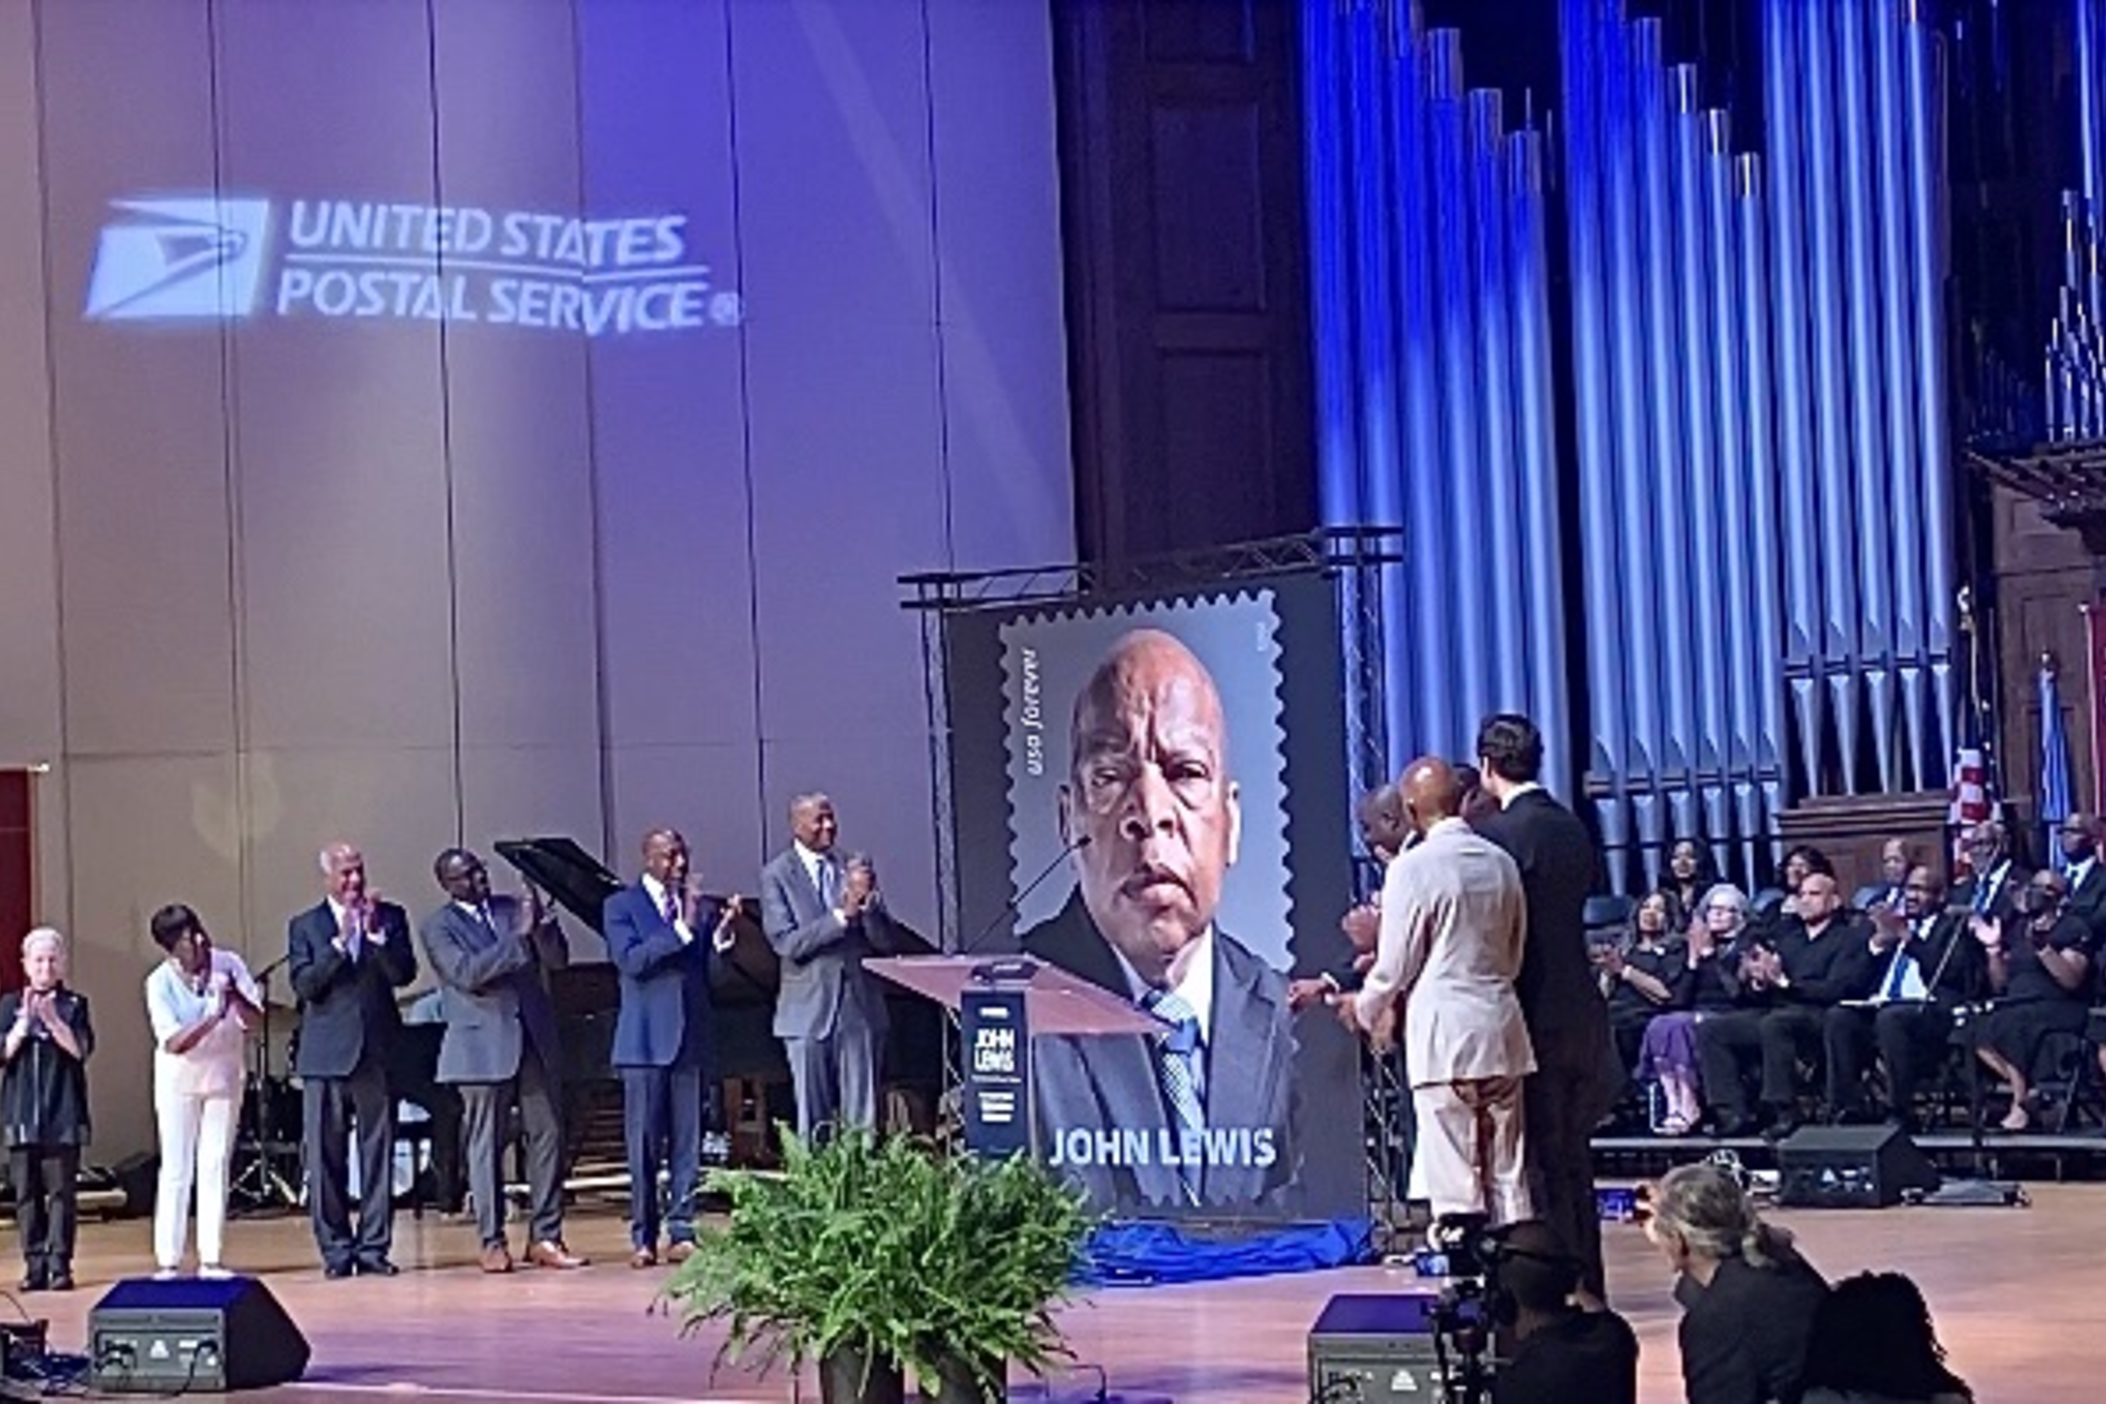 You are currently viewing John Lewis Forever Stamp unveiled at Morehouse College 